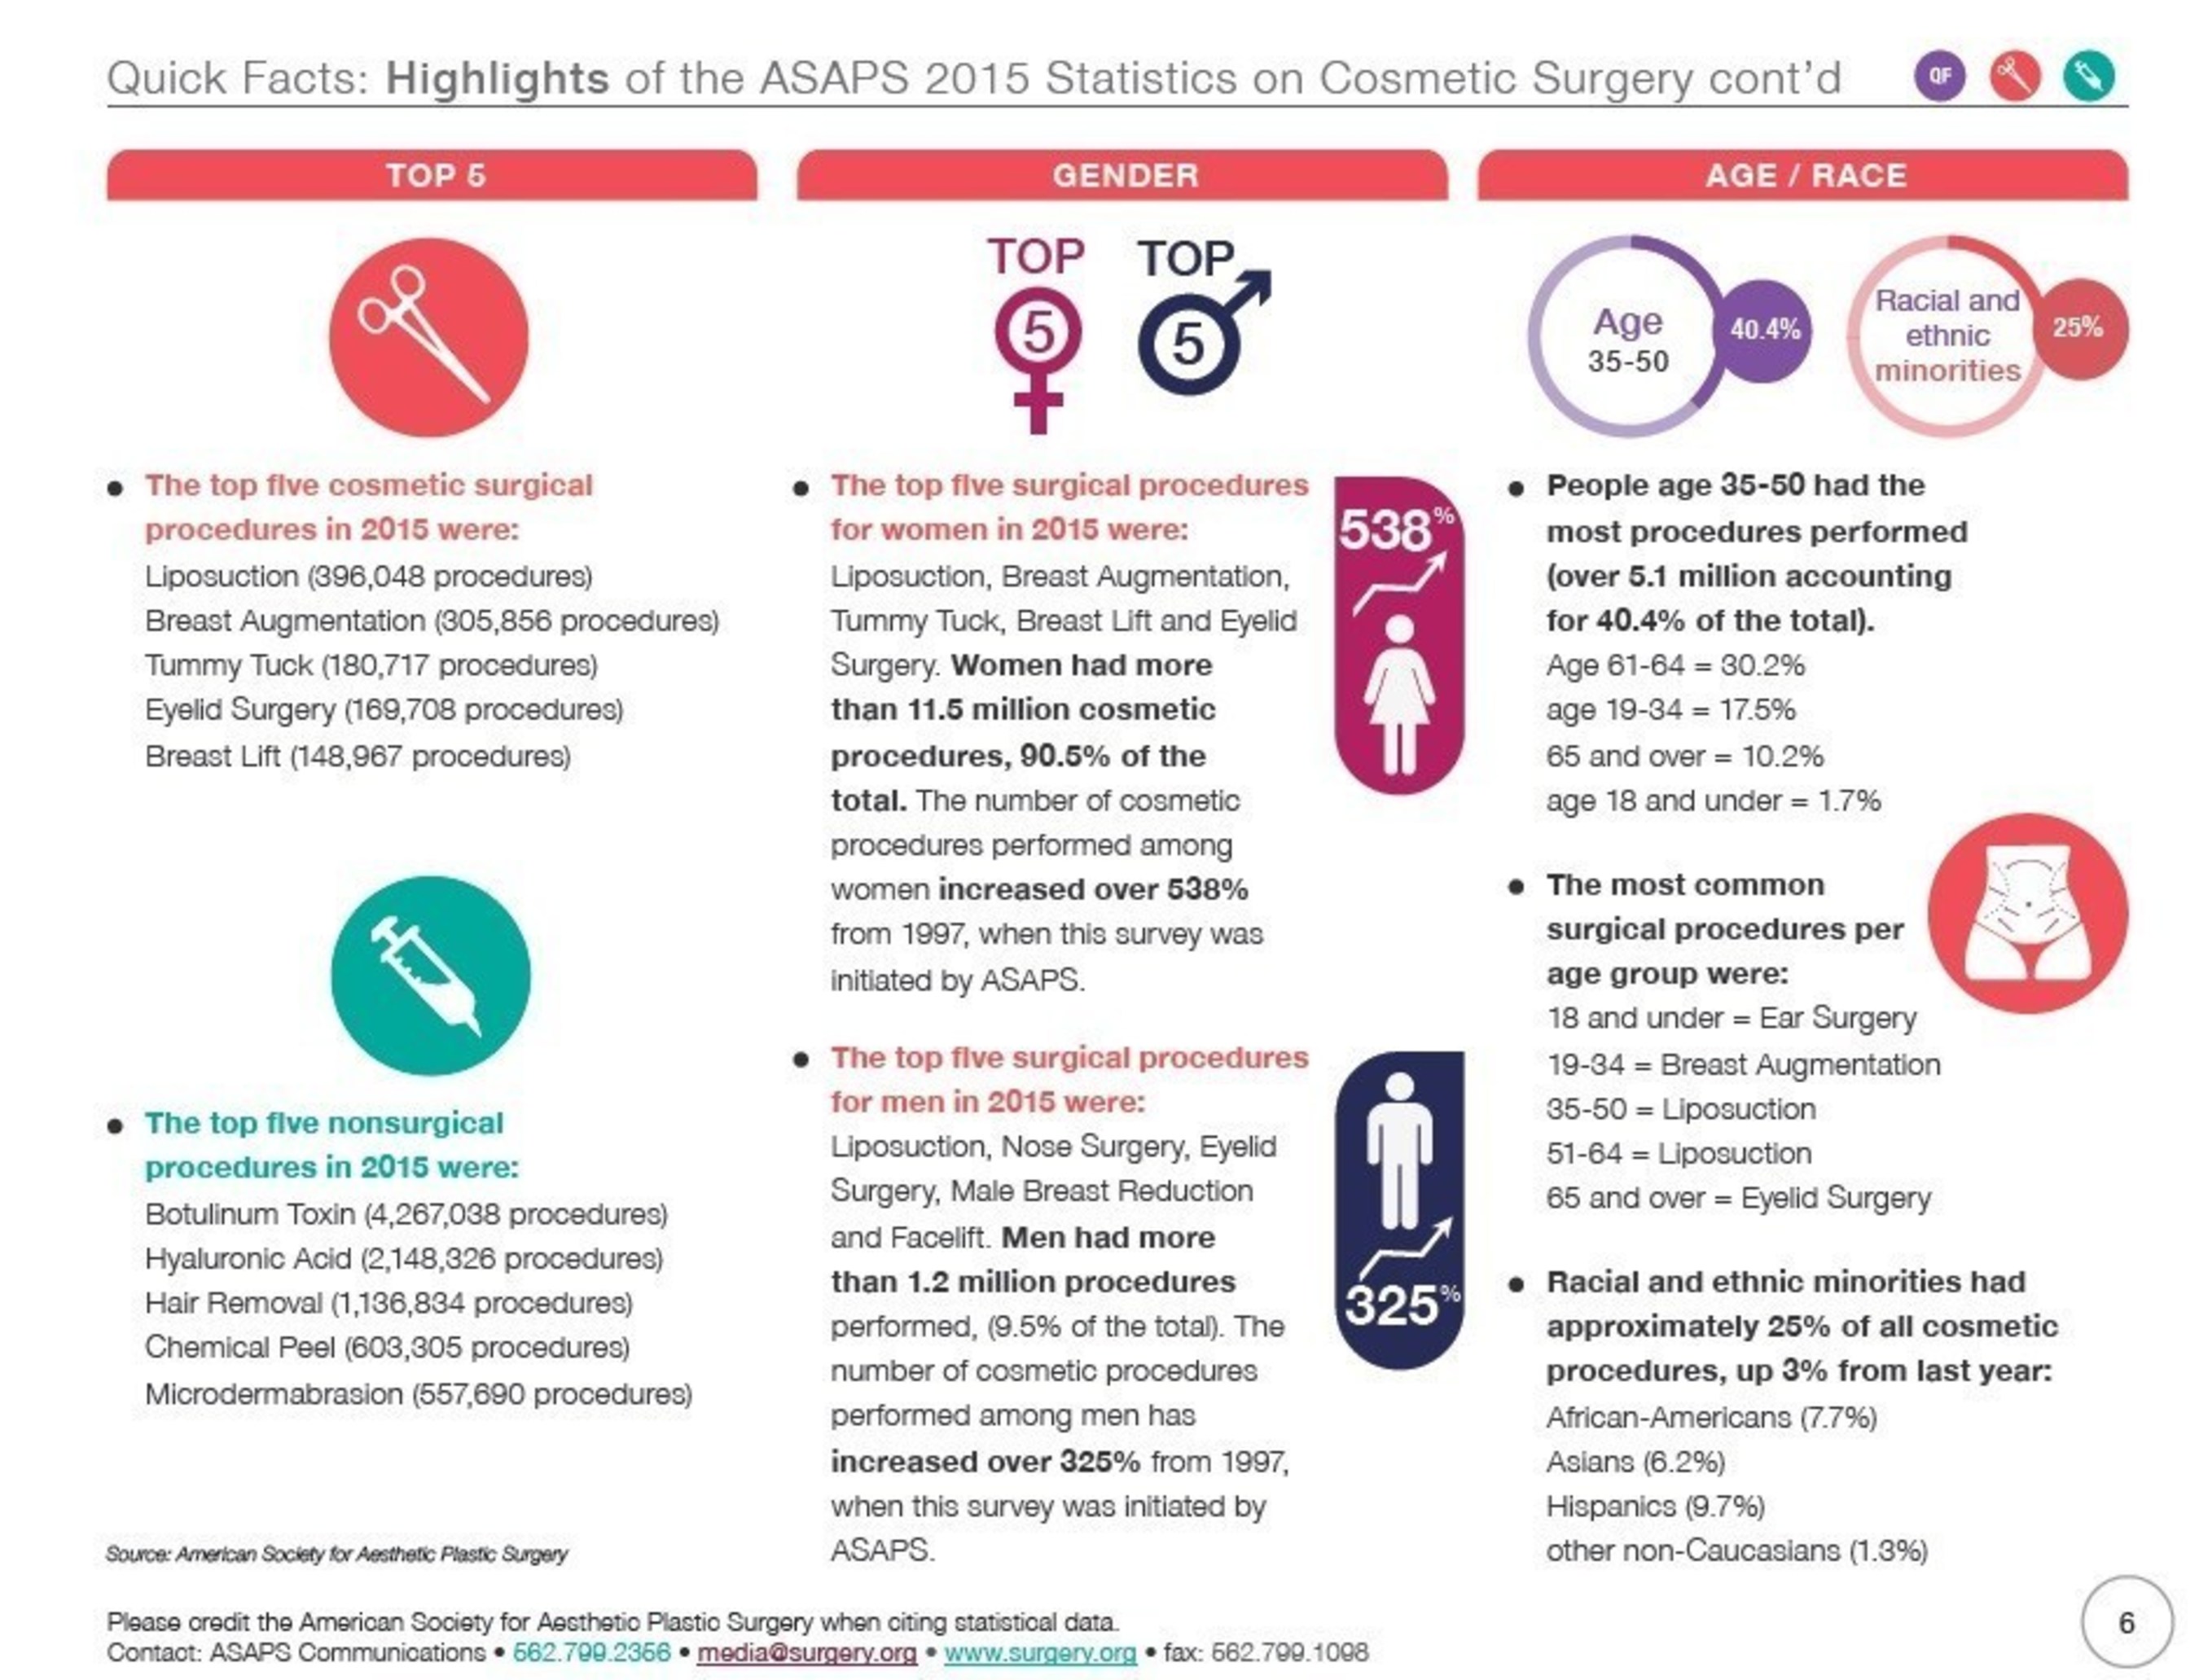 Highlights of the ASAPS 2015 Statistics on Cosmetic Surgery cont'd